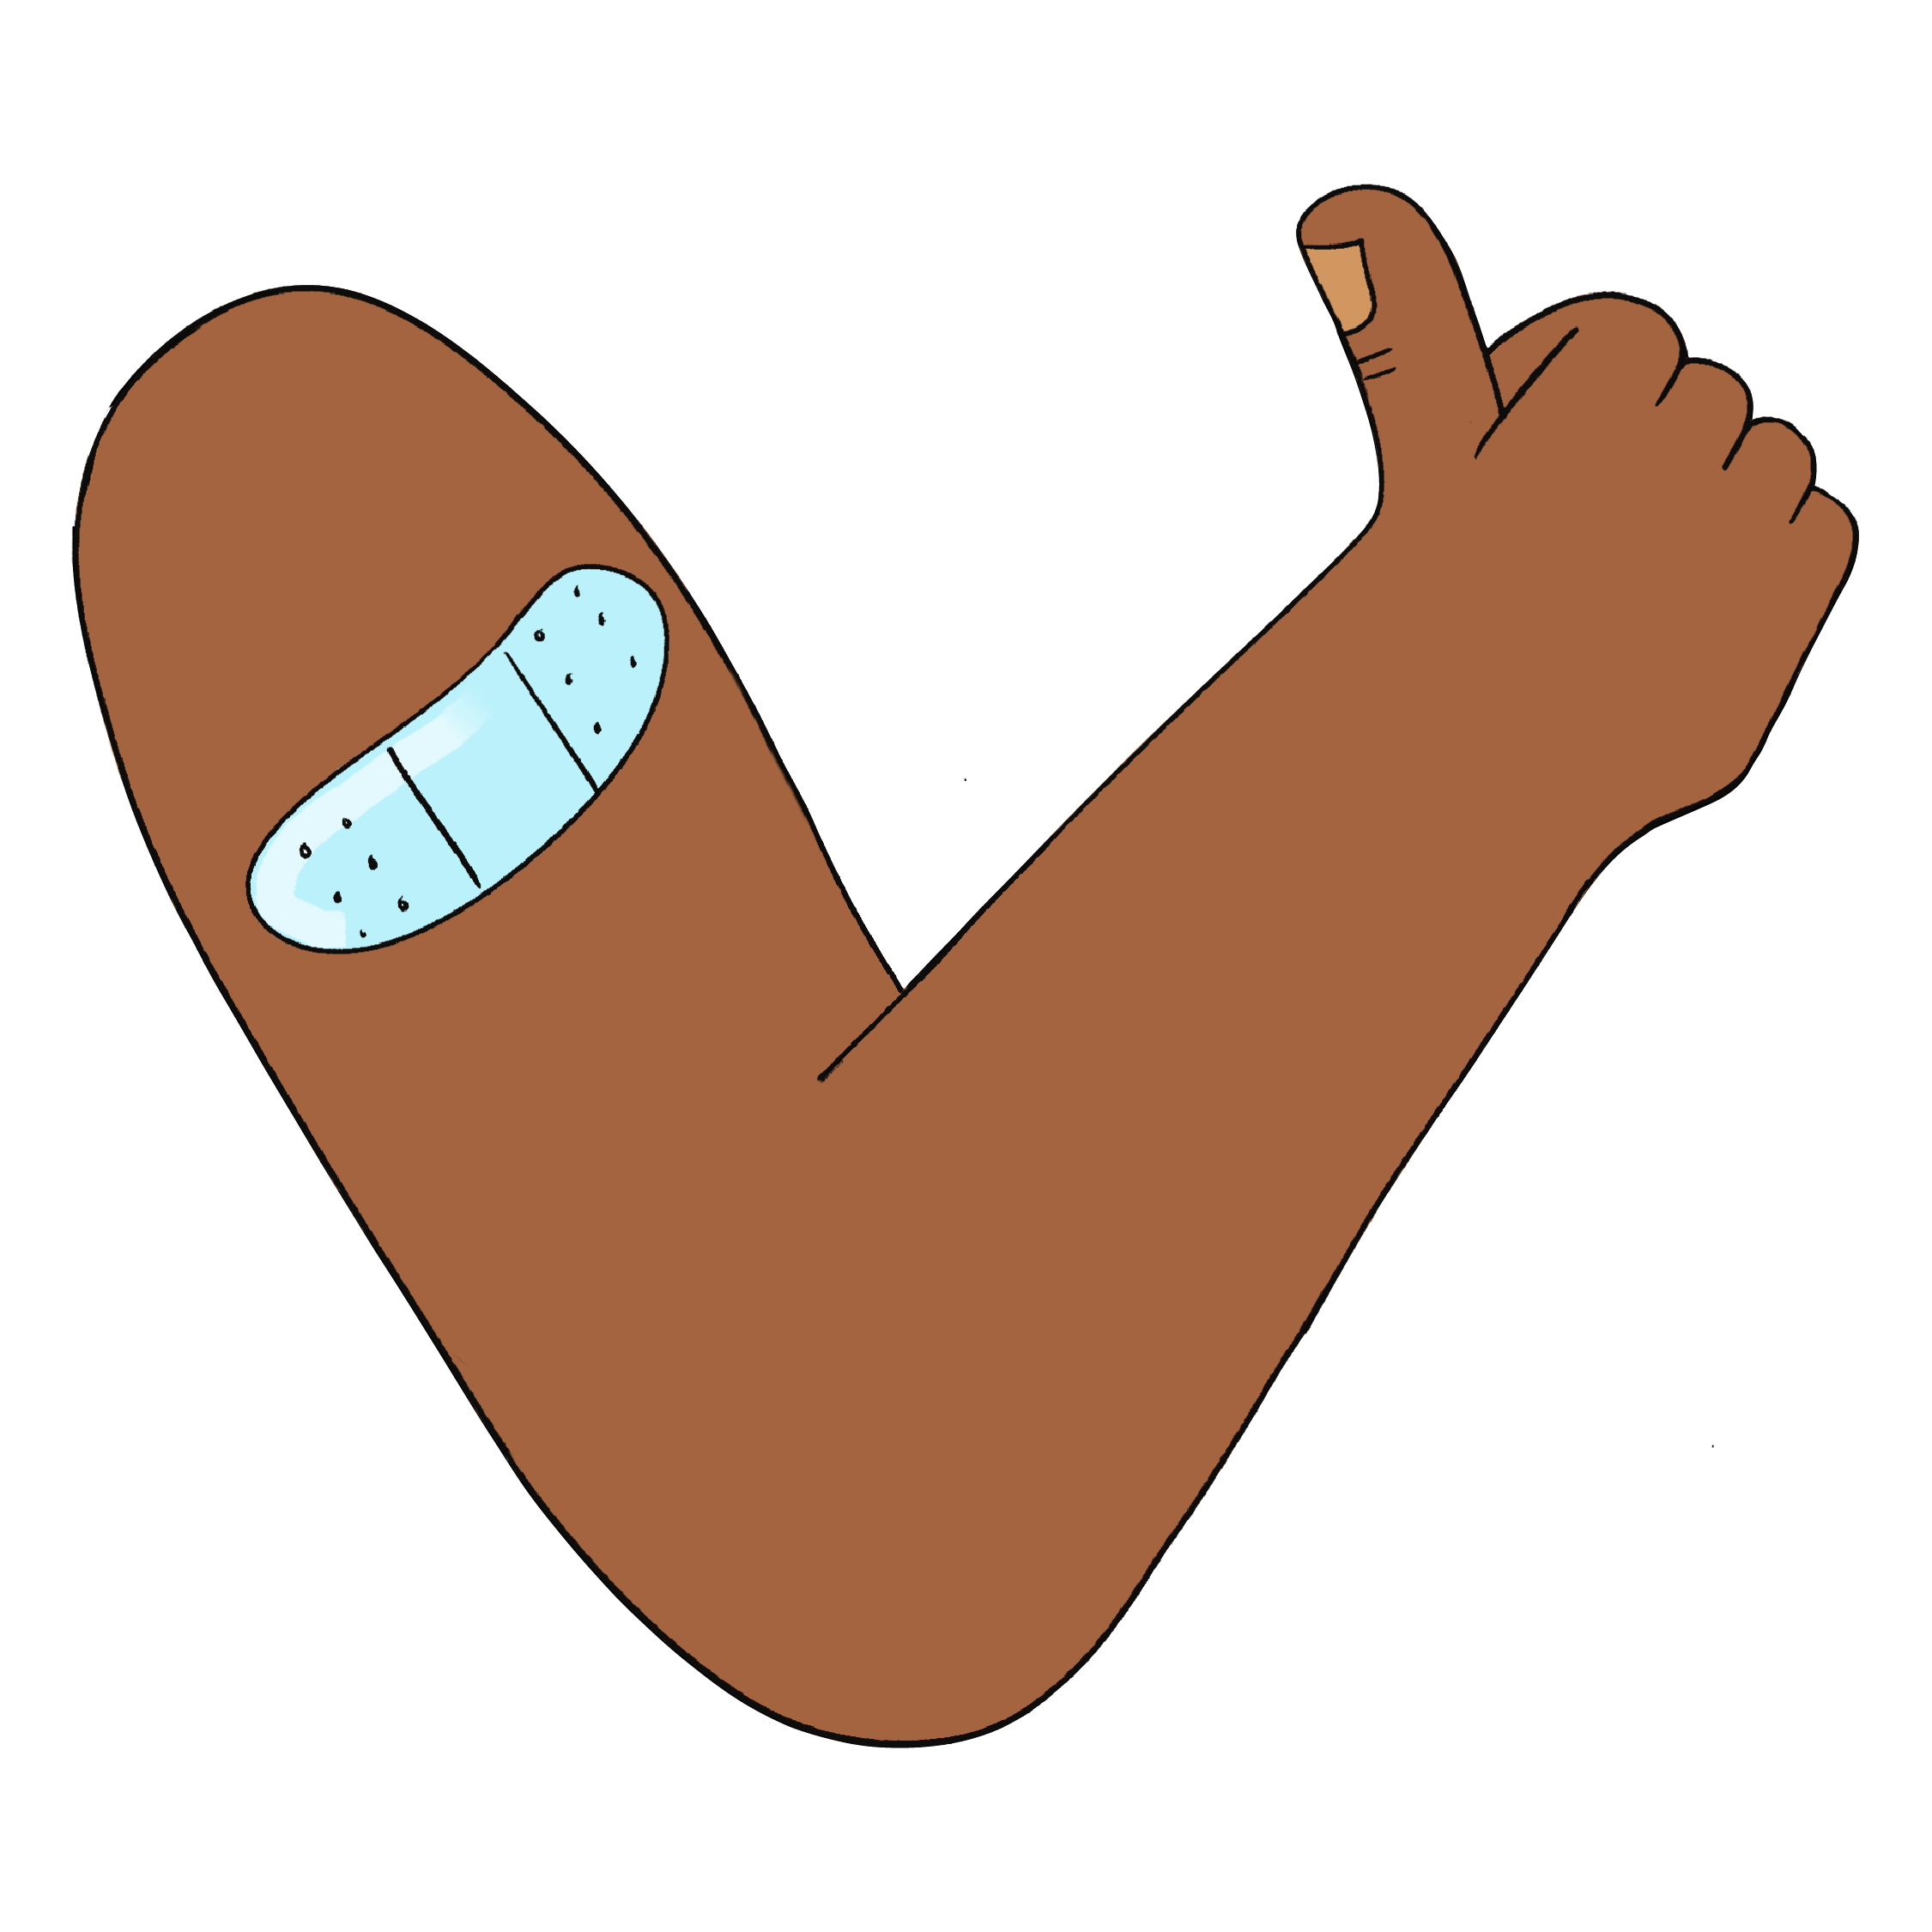 Illustration of an arm with a bandage and giving a thumbs up